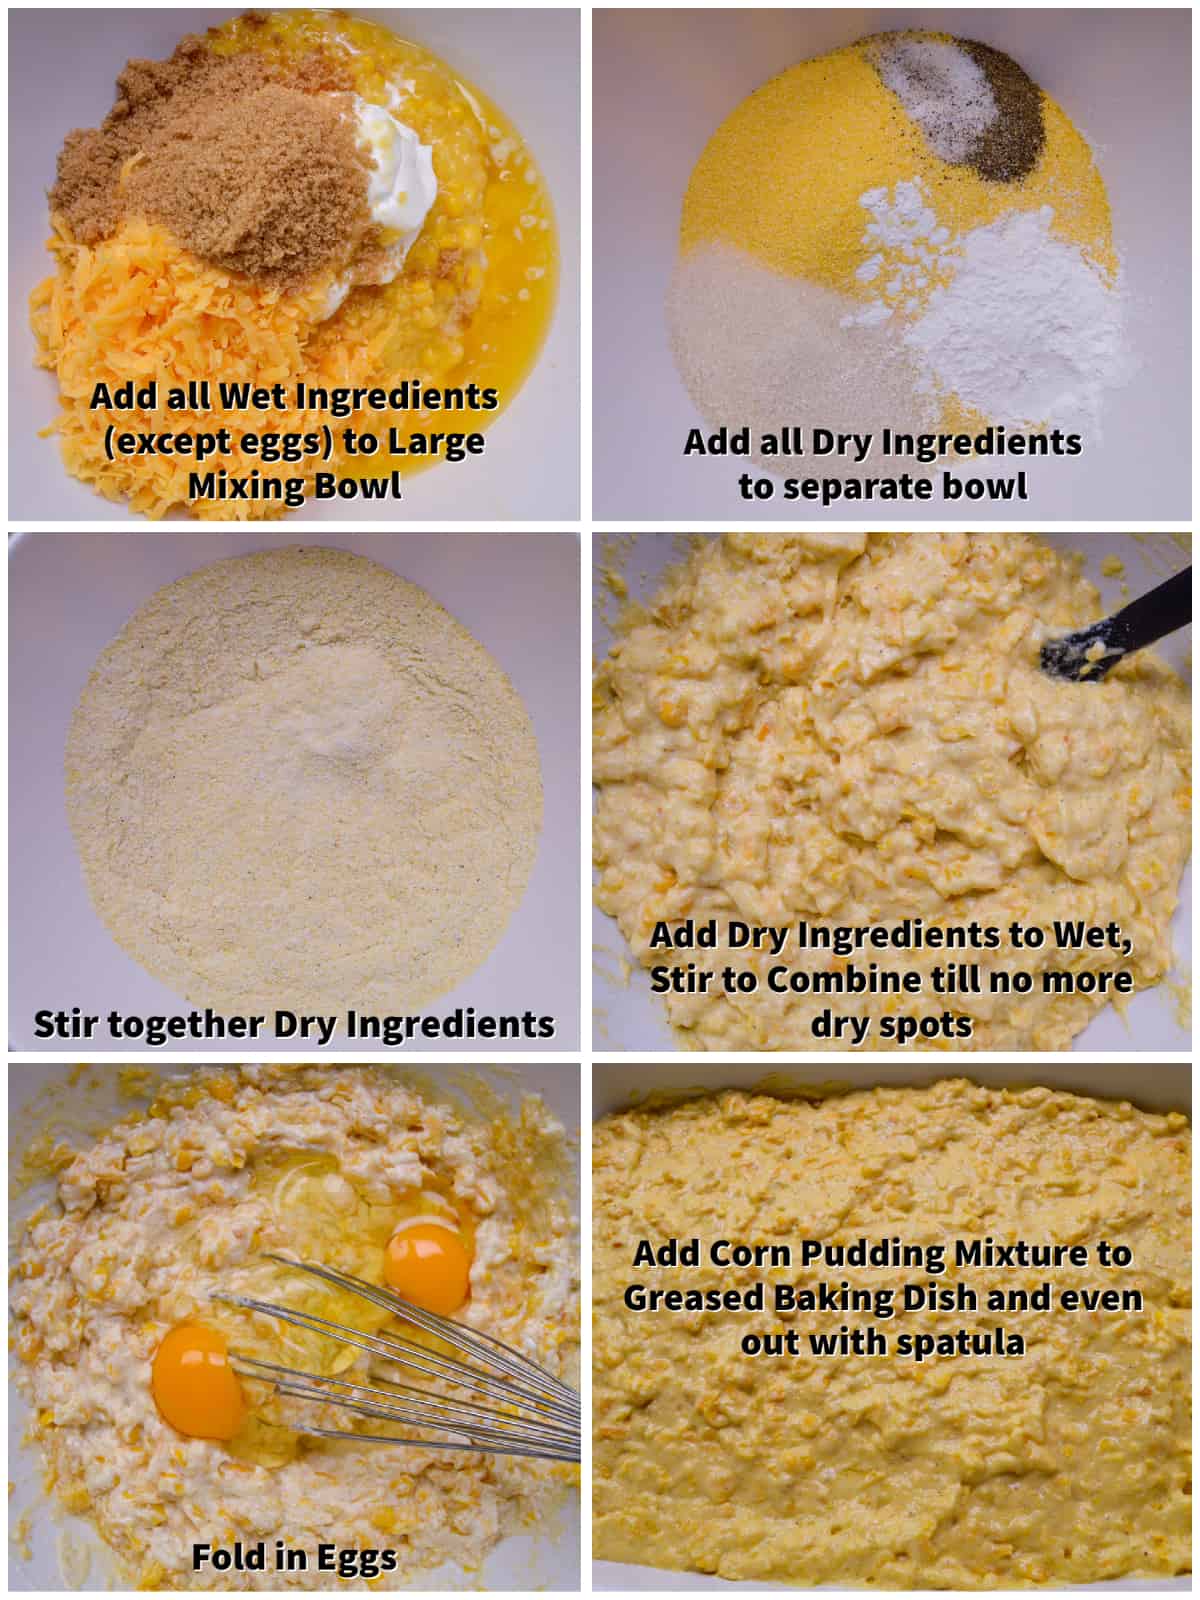 Steps Collage on How to Make Corn Pudding Casserole